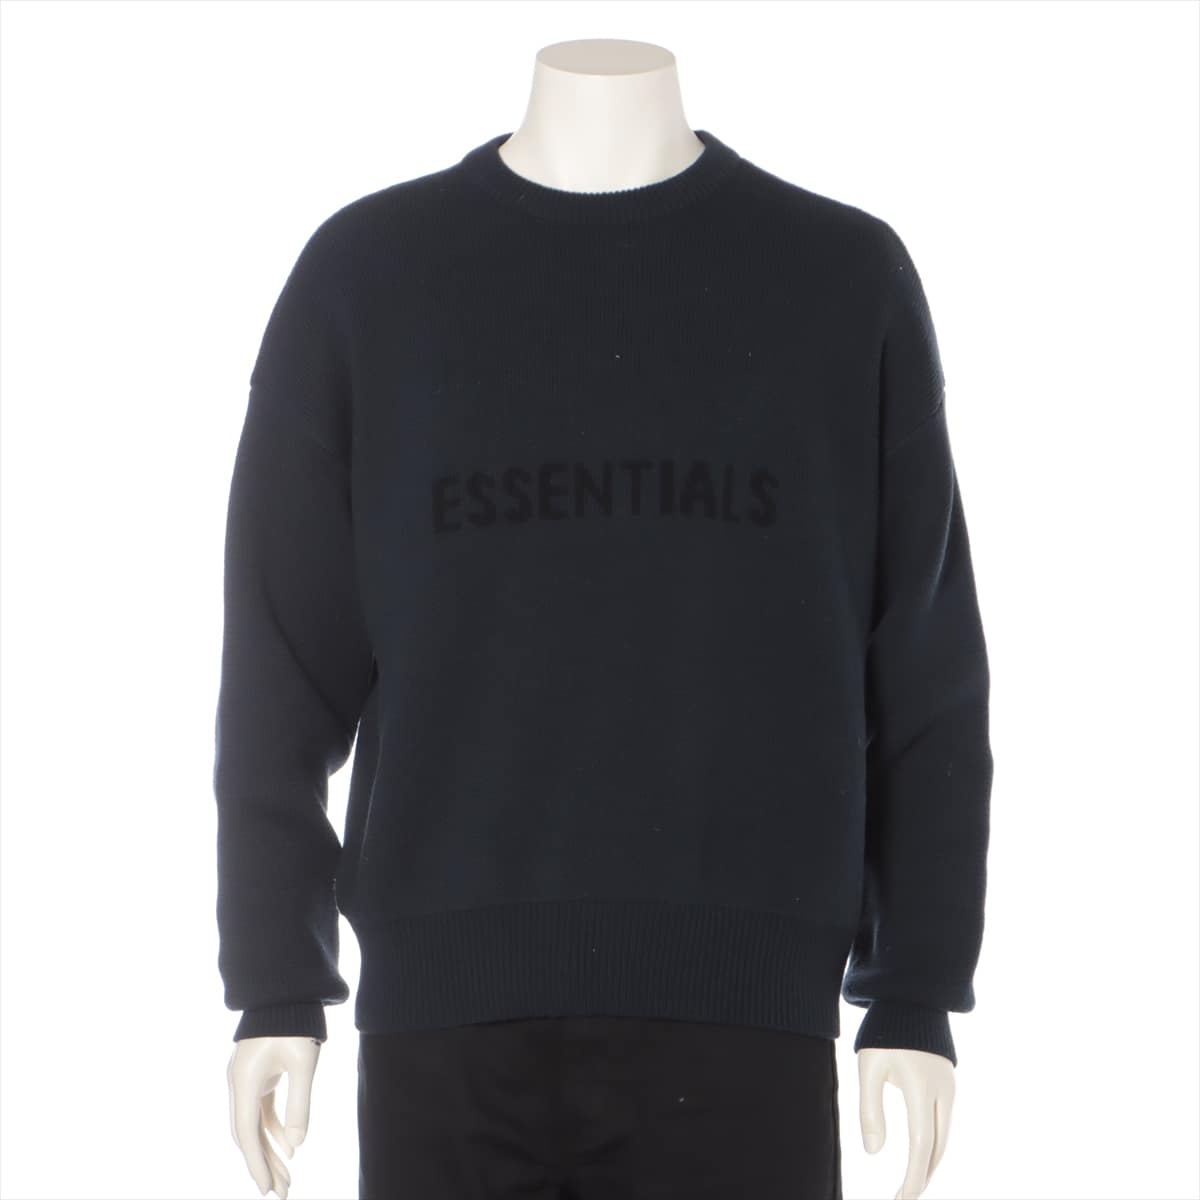 FEAR OF GOD Essentials Cotton & Polyester Sweater XS Men's Navy blue